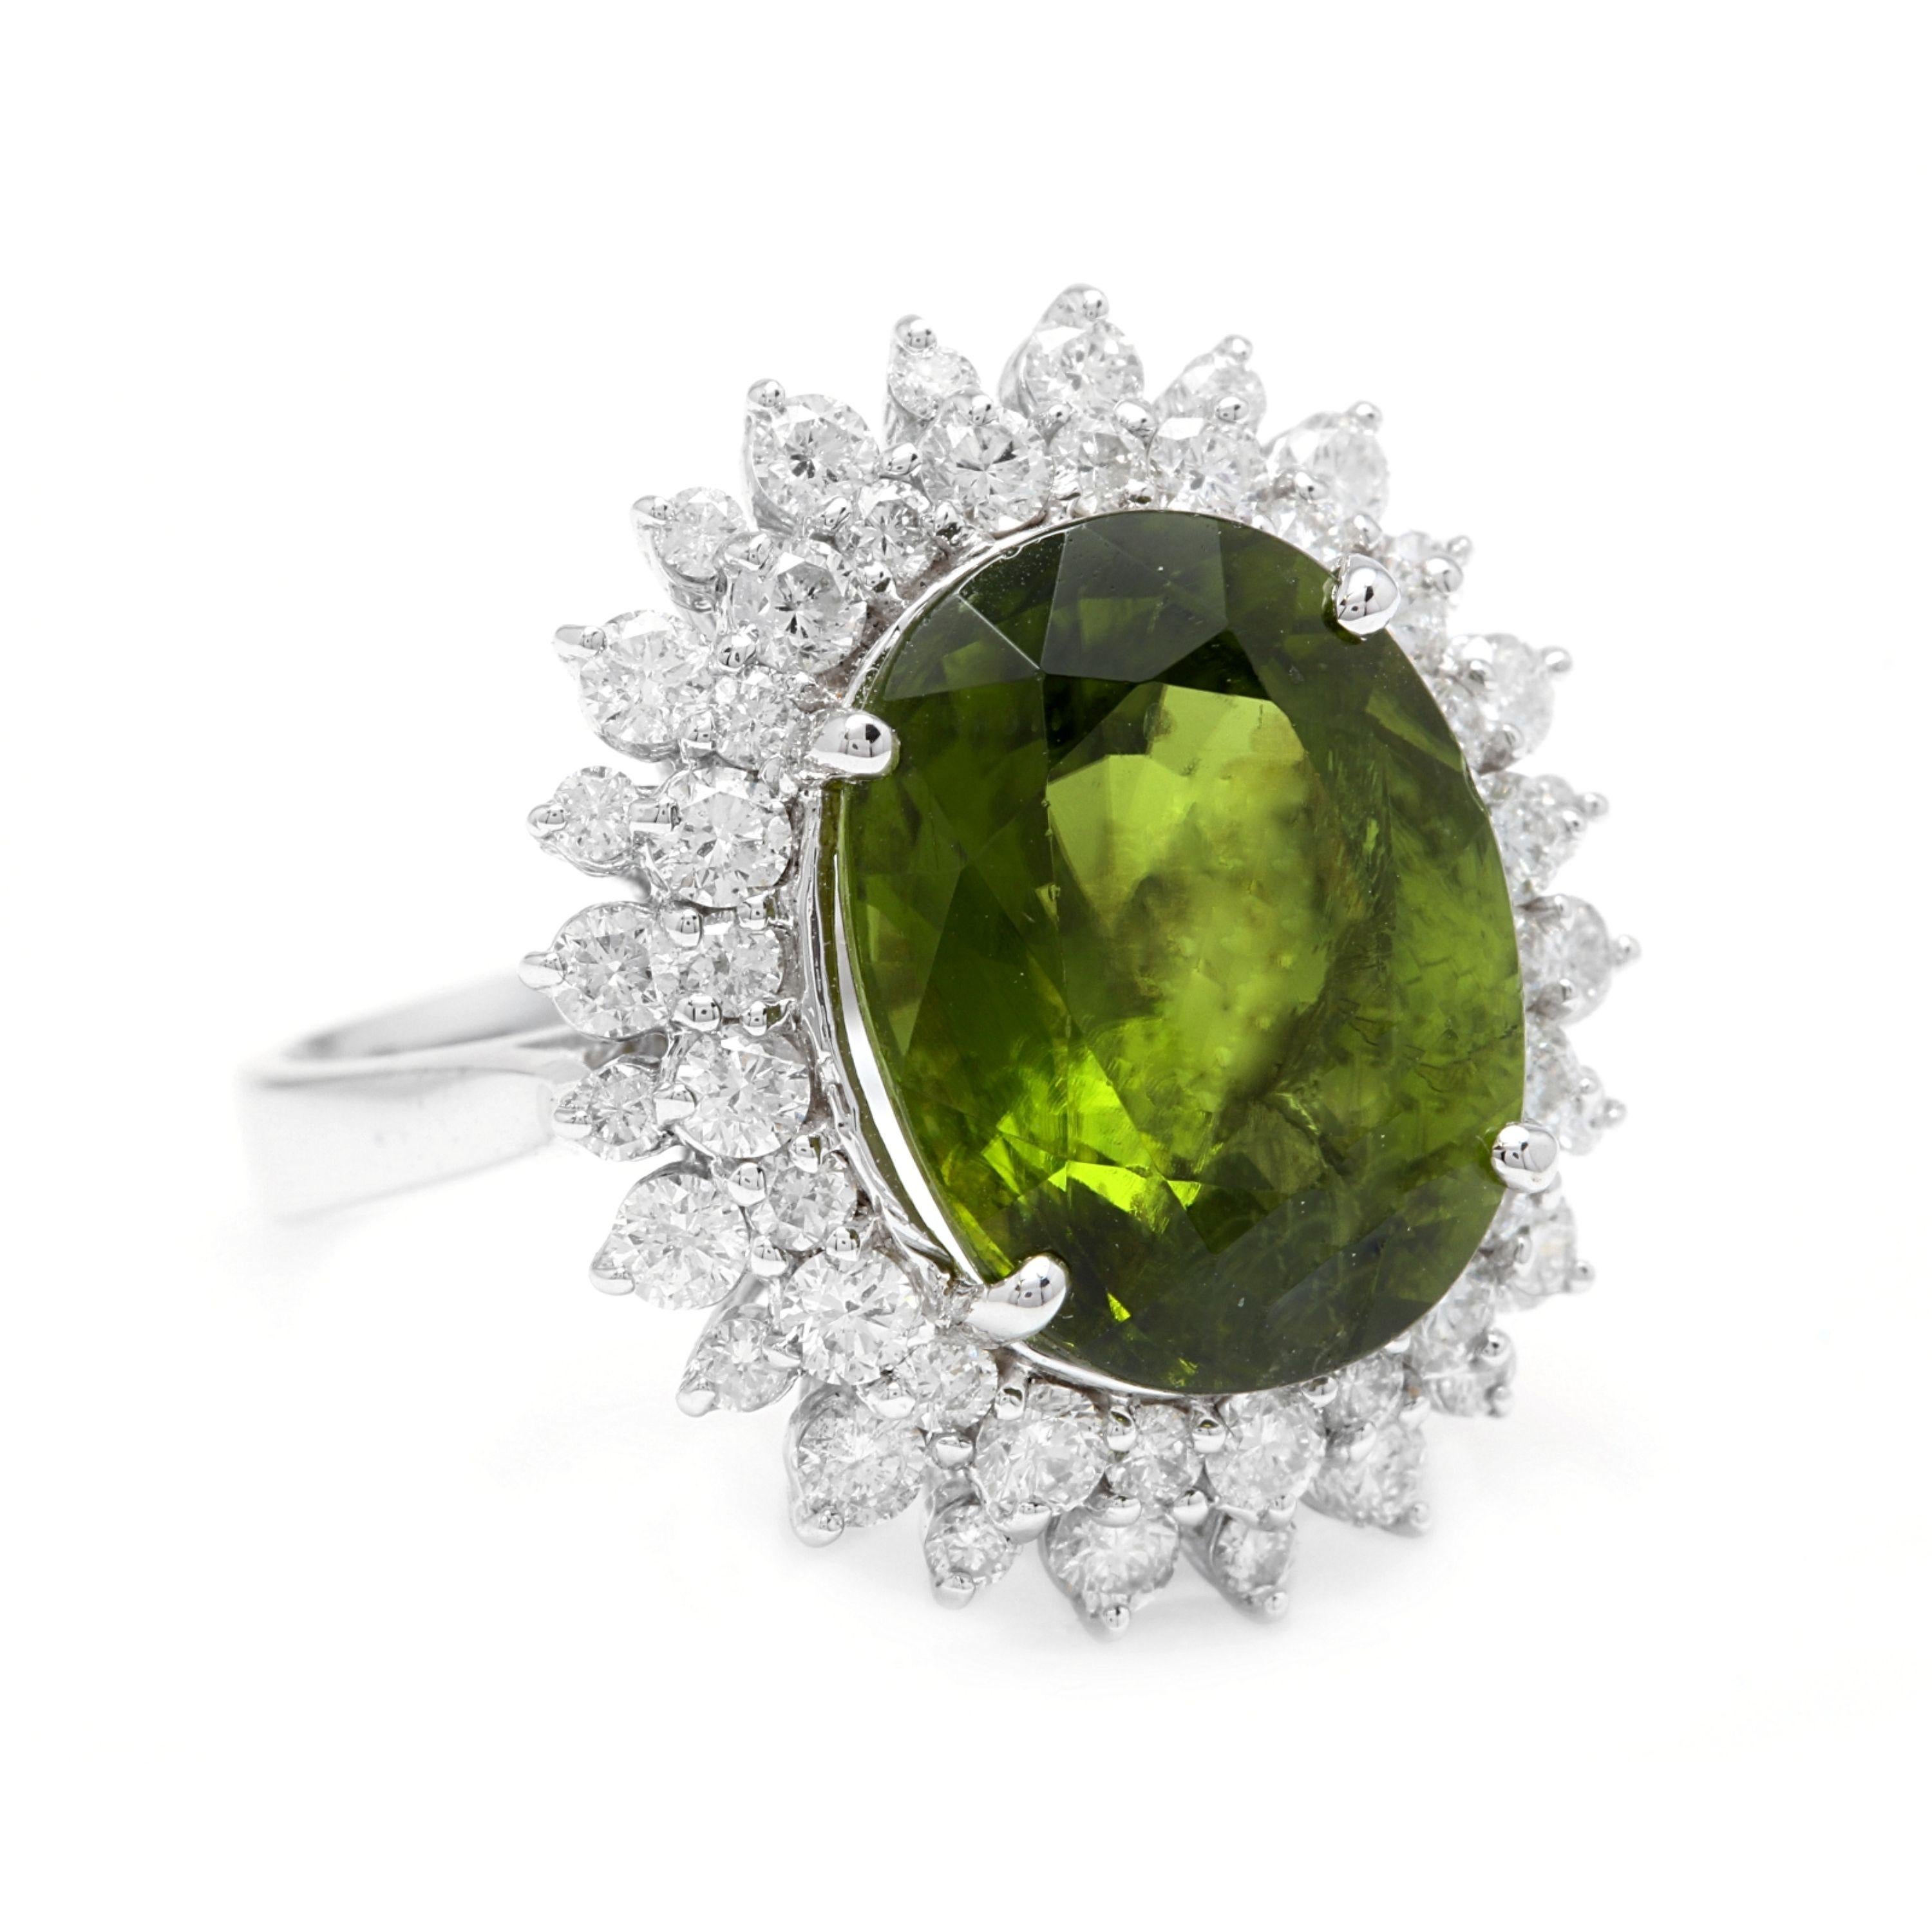 11.30 Carats Natural Very Nice Looking Green Tourmaline and Diamond 14K Solid White Gold Ring

Total Natural Oval Cut Tourmaline Weight is: Approx. 9.50 Carats

Tourmaline Measures: Approx. 14.00 x 11.00mm

Top of the ring measures: 22 x